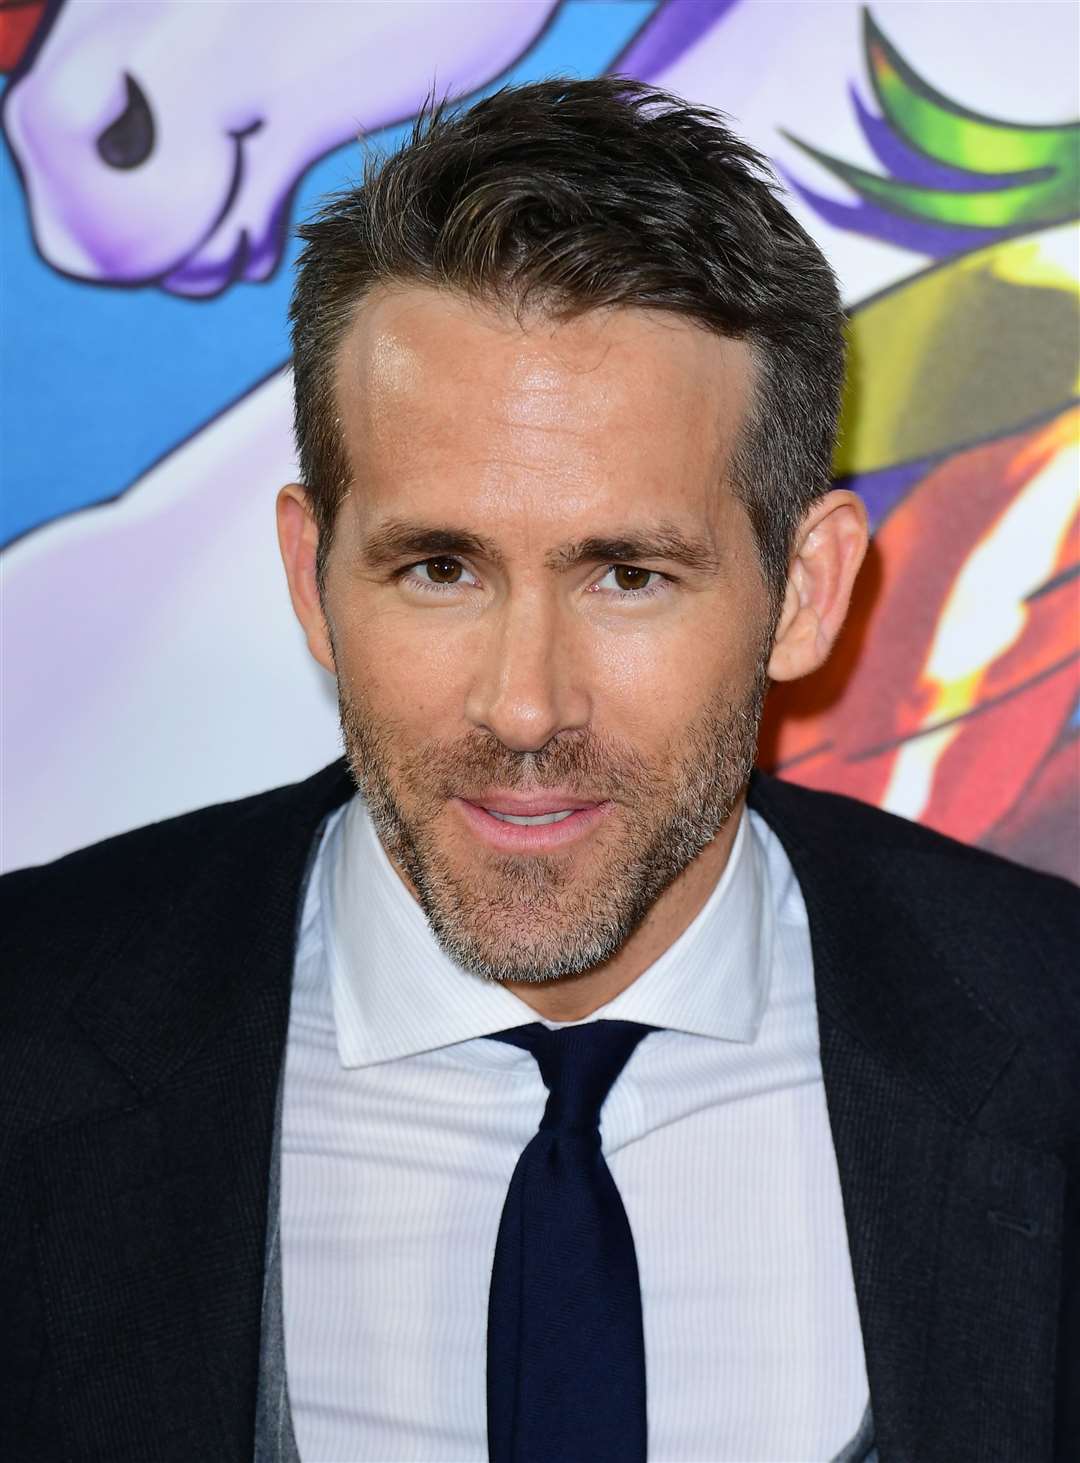 Ryan Reynolds experienced the rollercoaster of English football as he took in his first live Wrexham match (Ian West/PA)